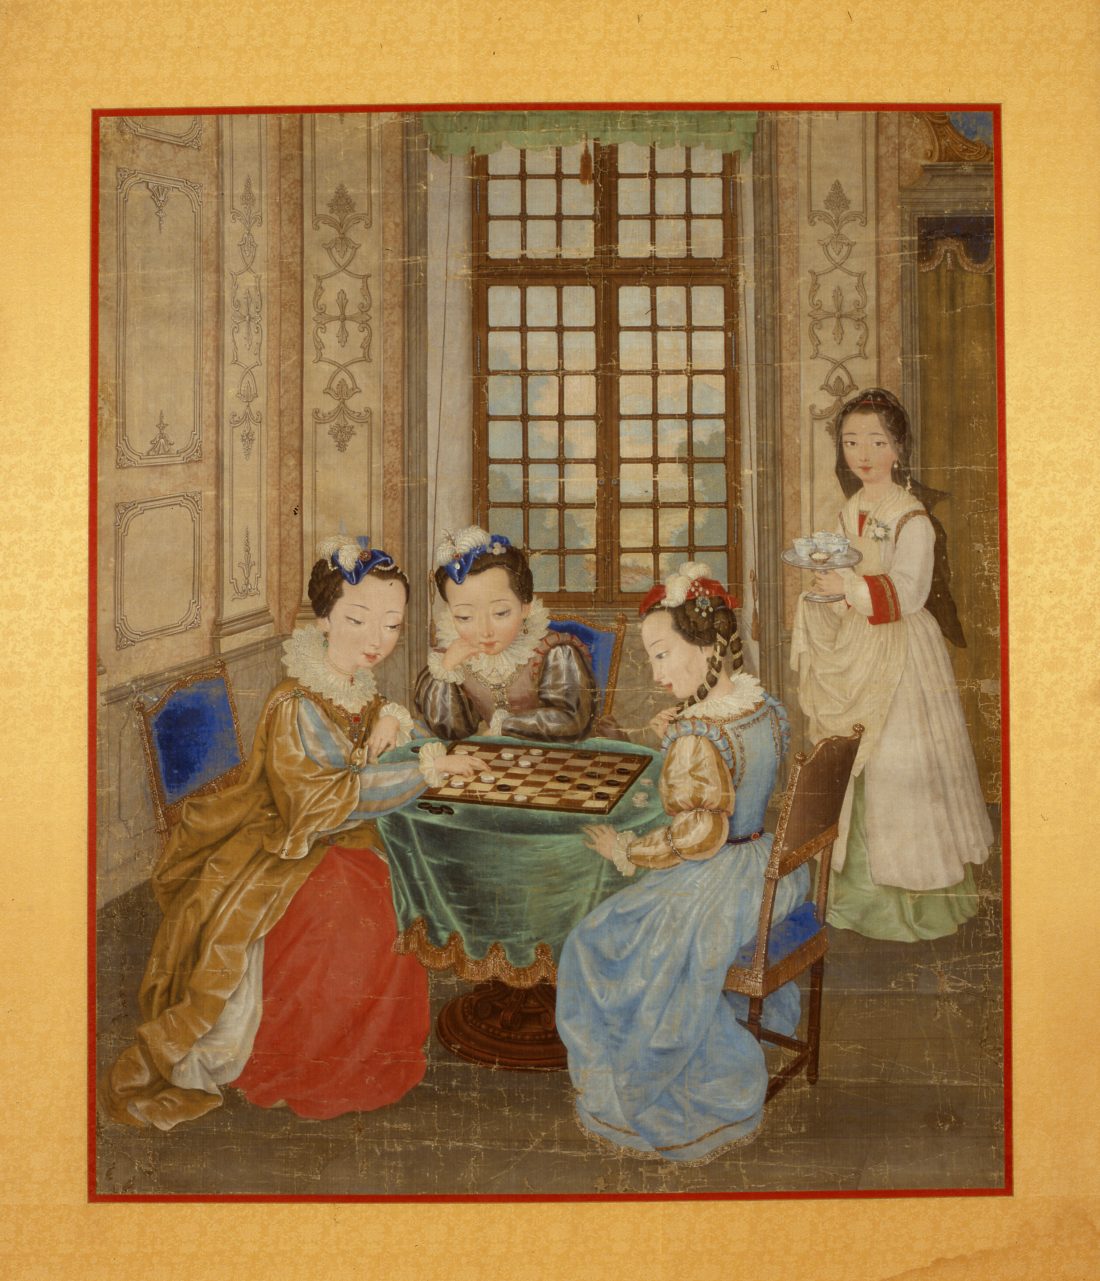 Court ladies sitting, game, table, summer palace, painting